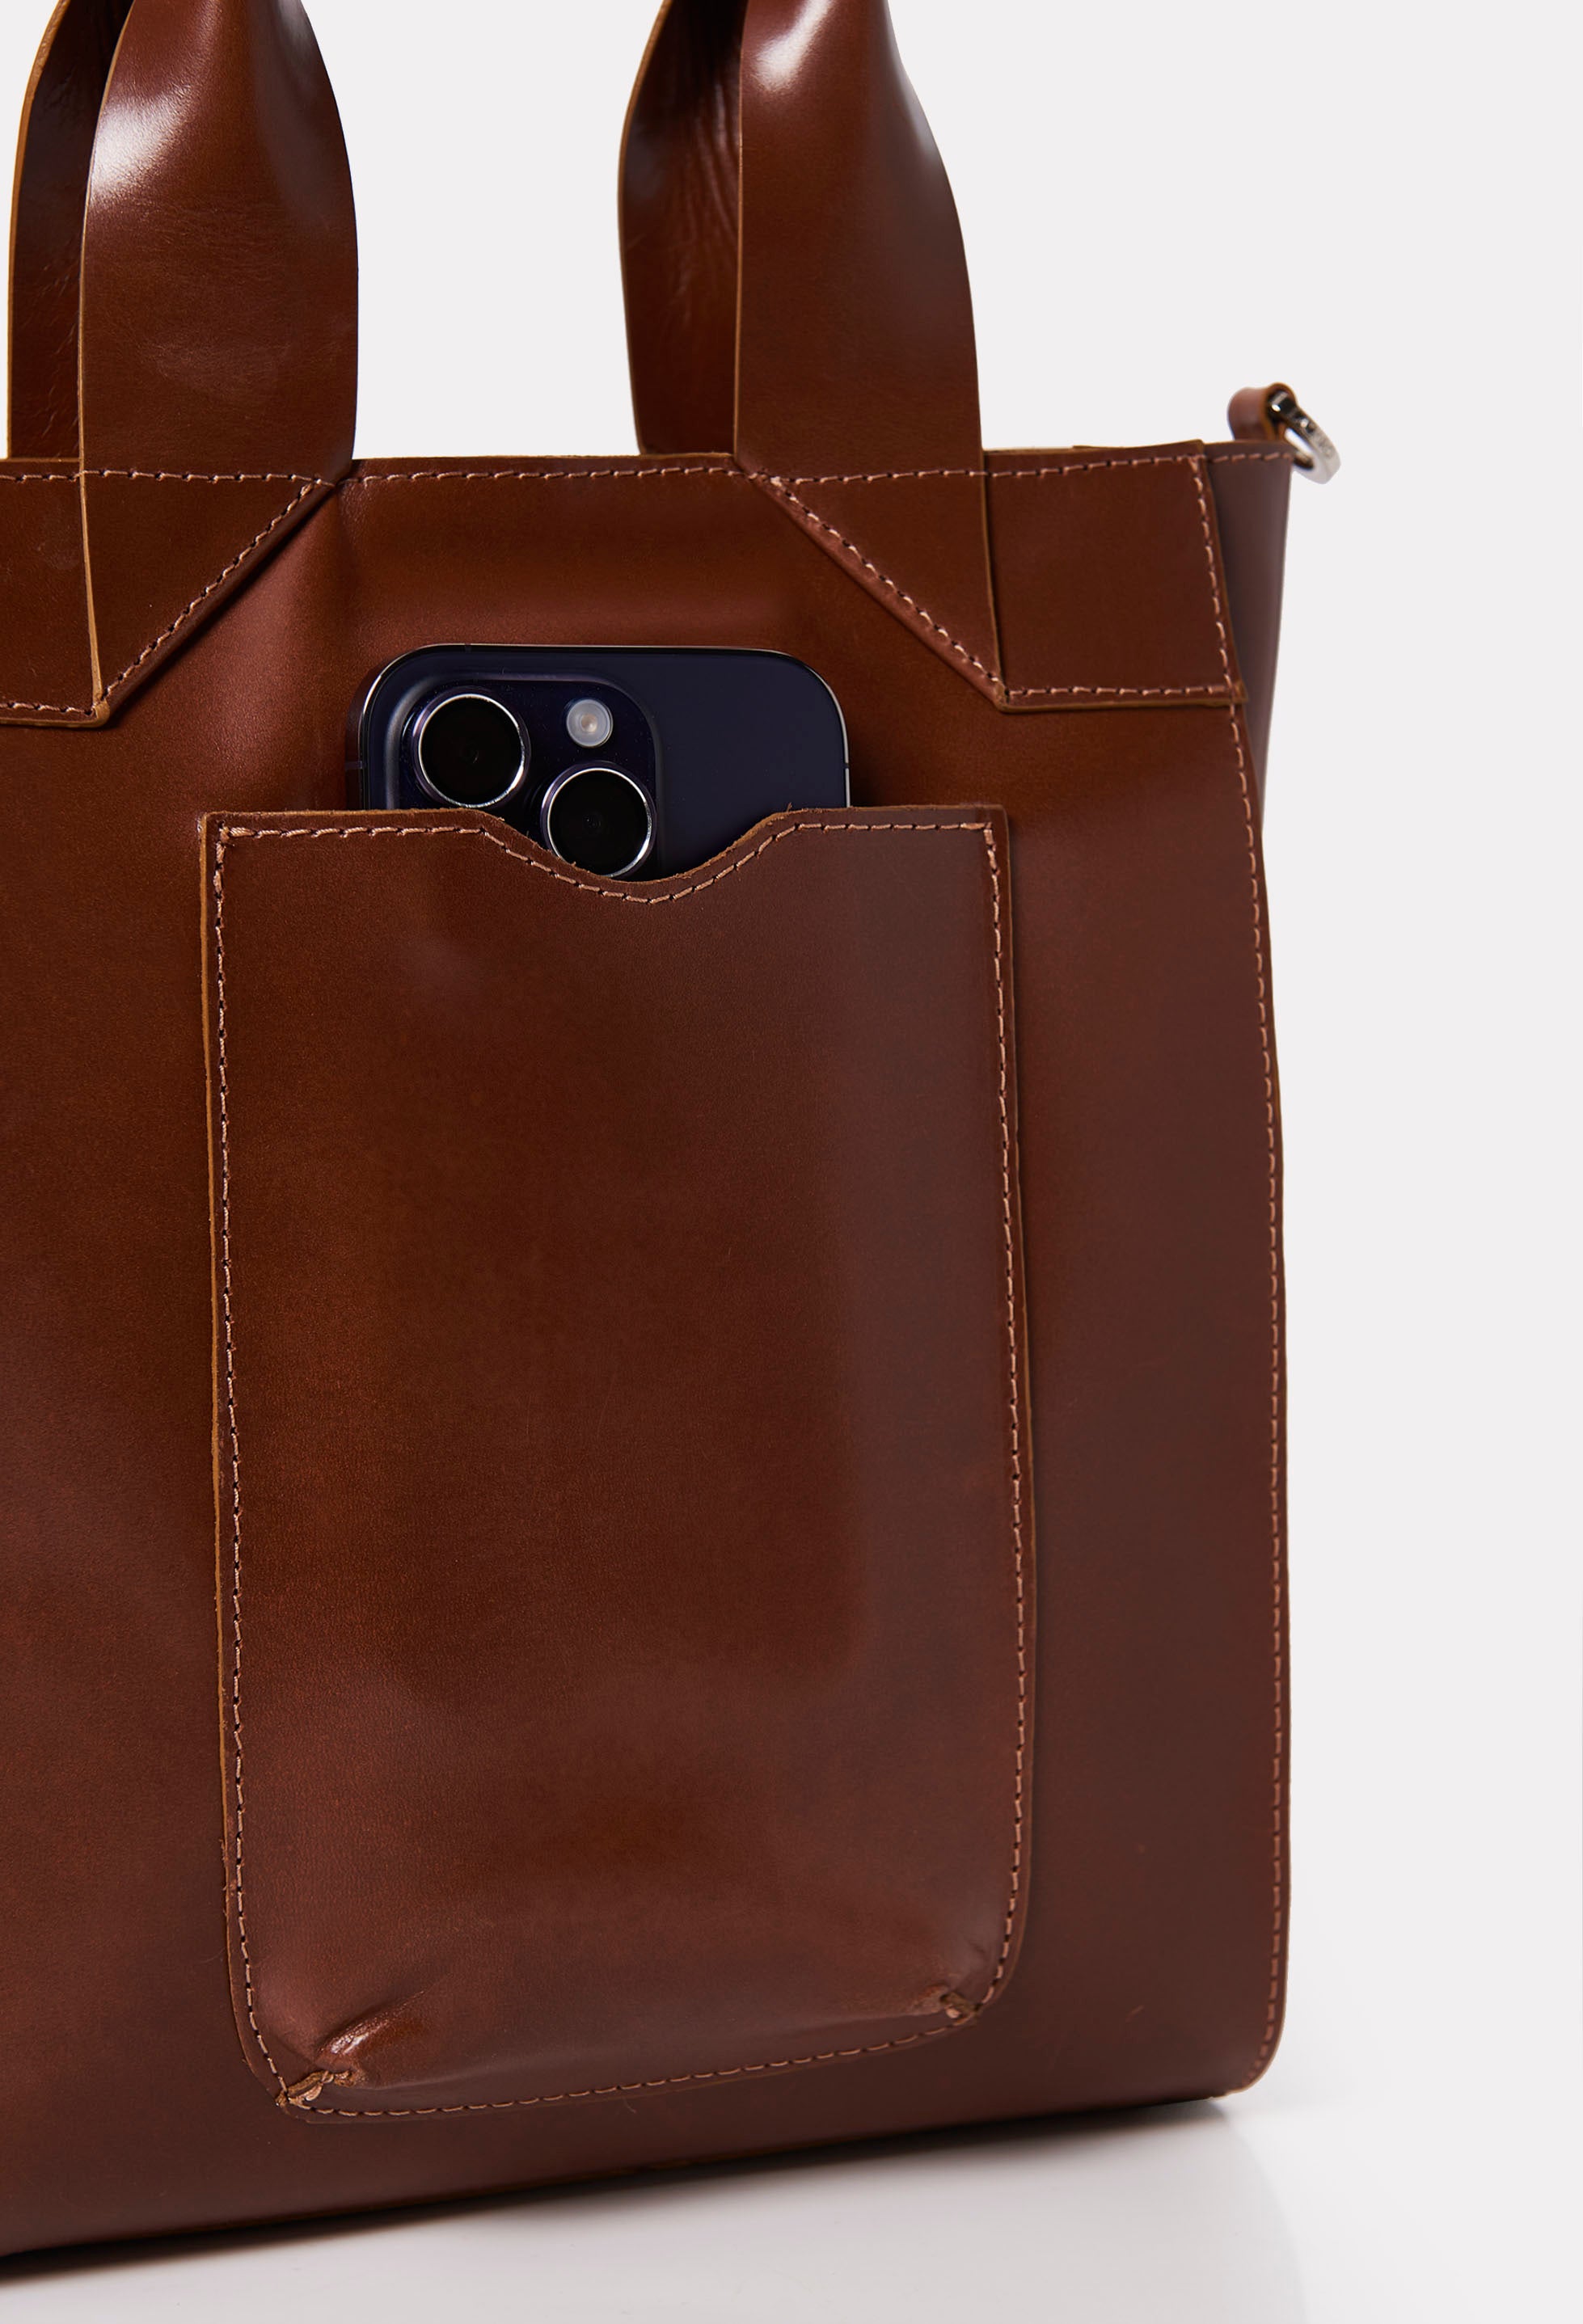 Partial photo of a Tan Leather Mini Tote Bag Lambro with an external cell phone holder pocket.